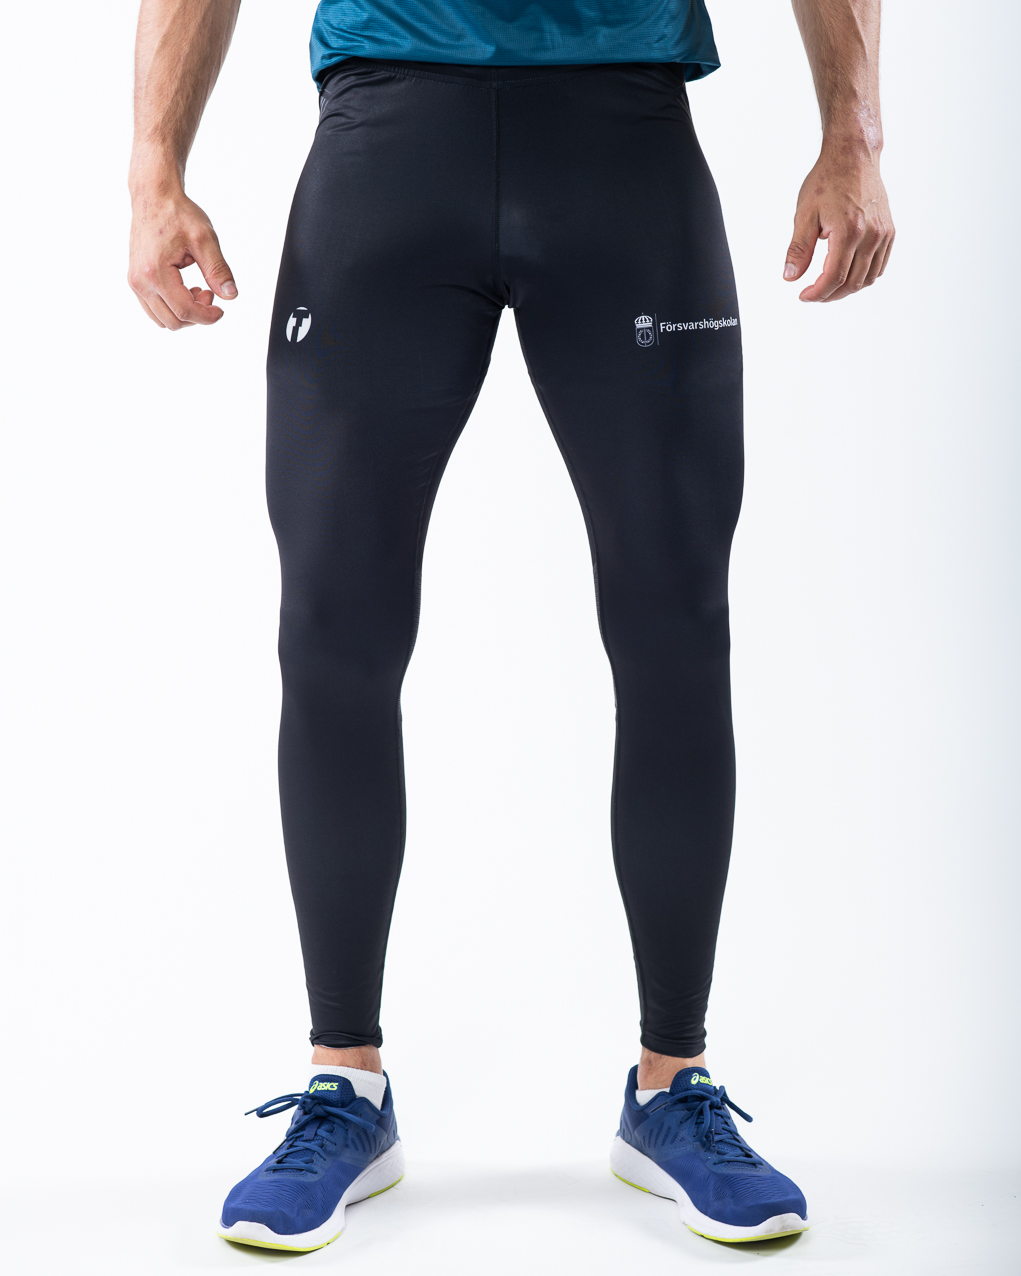 Men's tights front